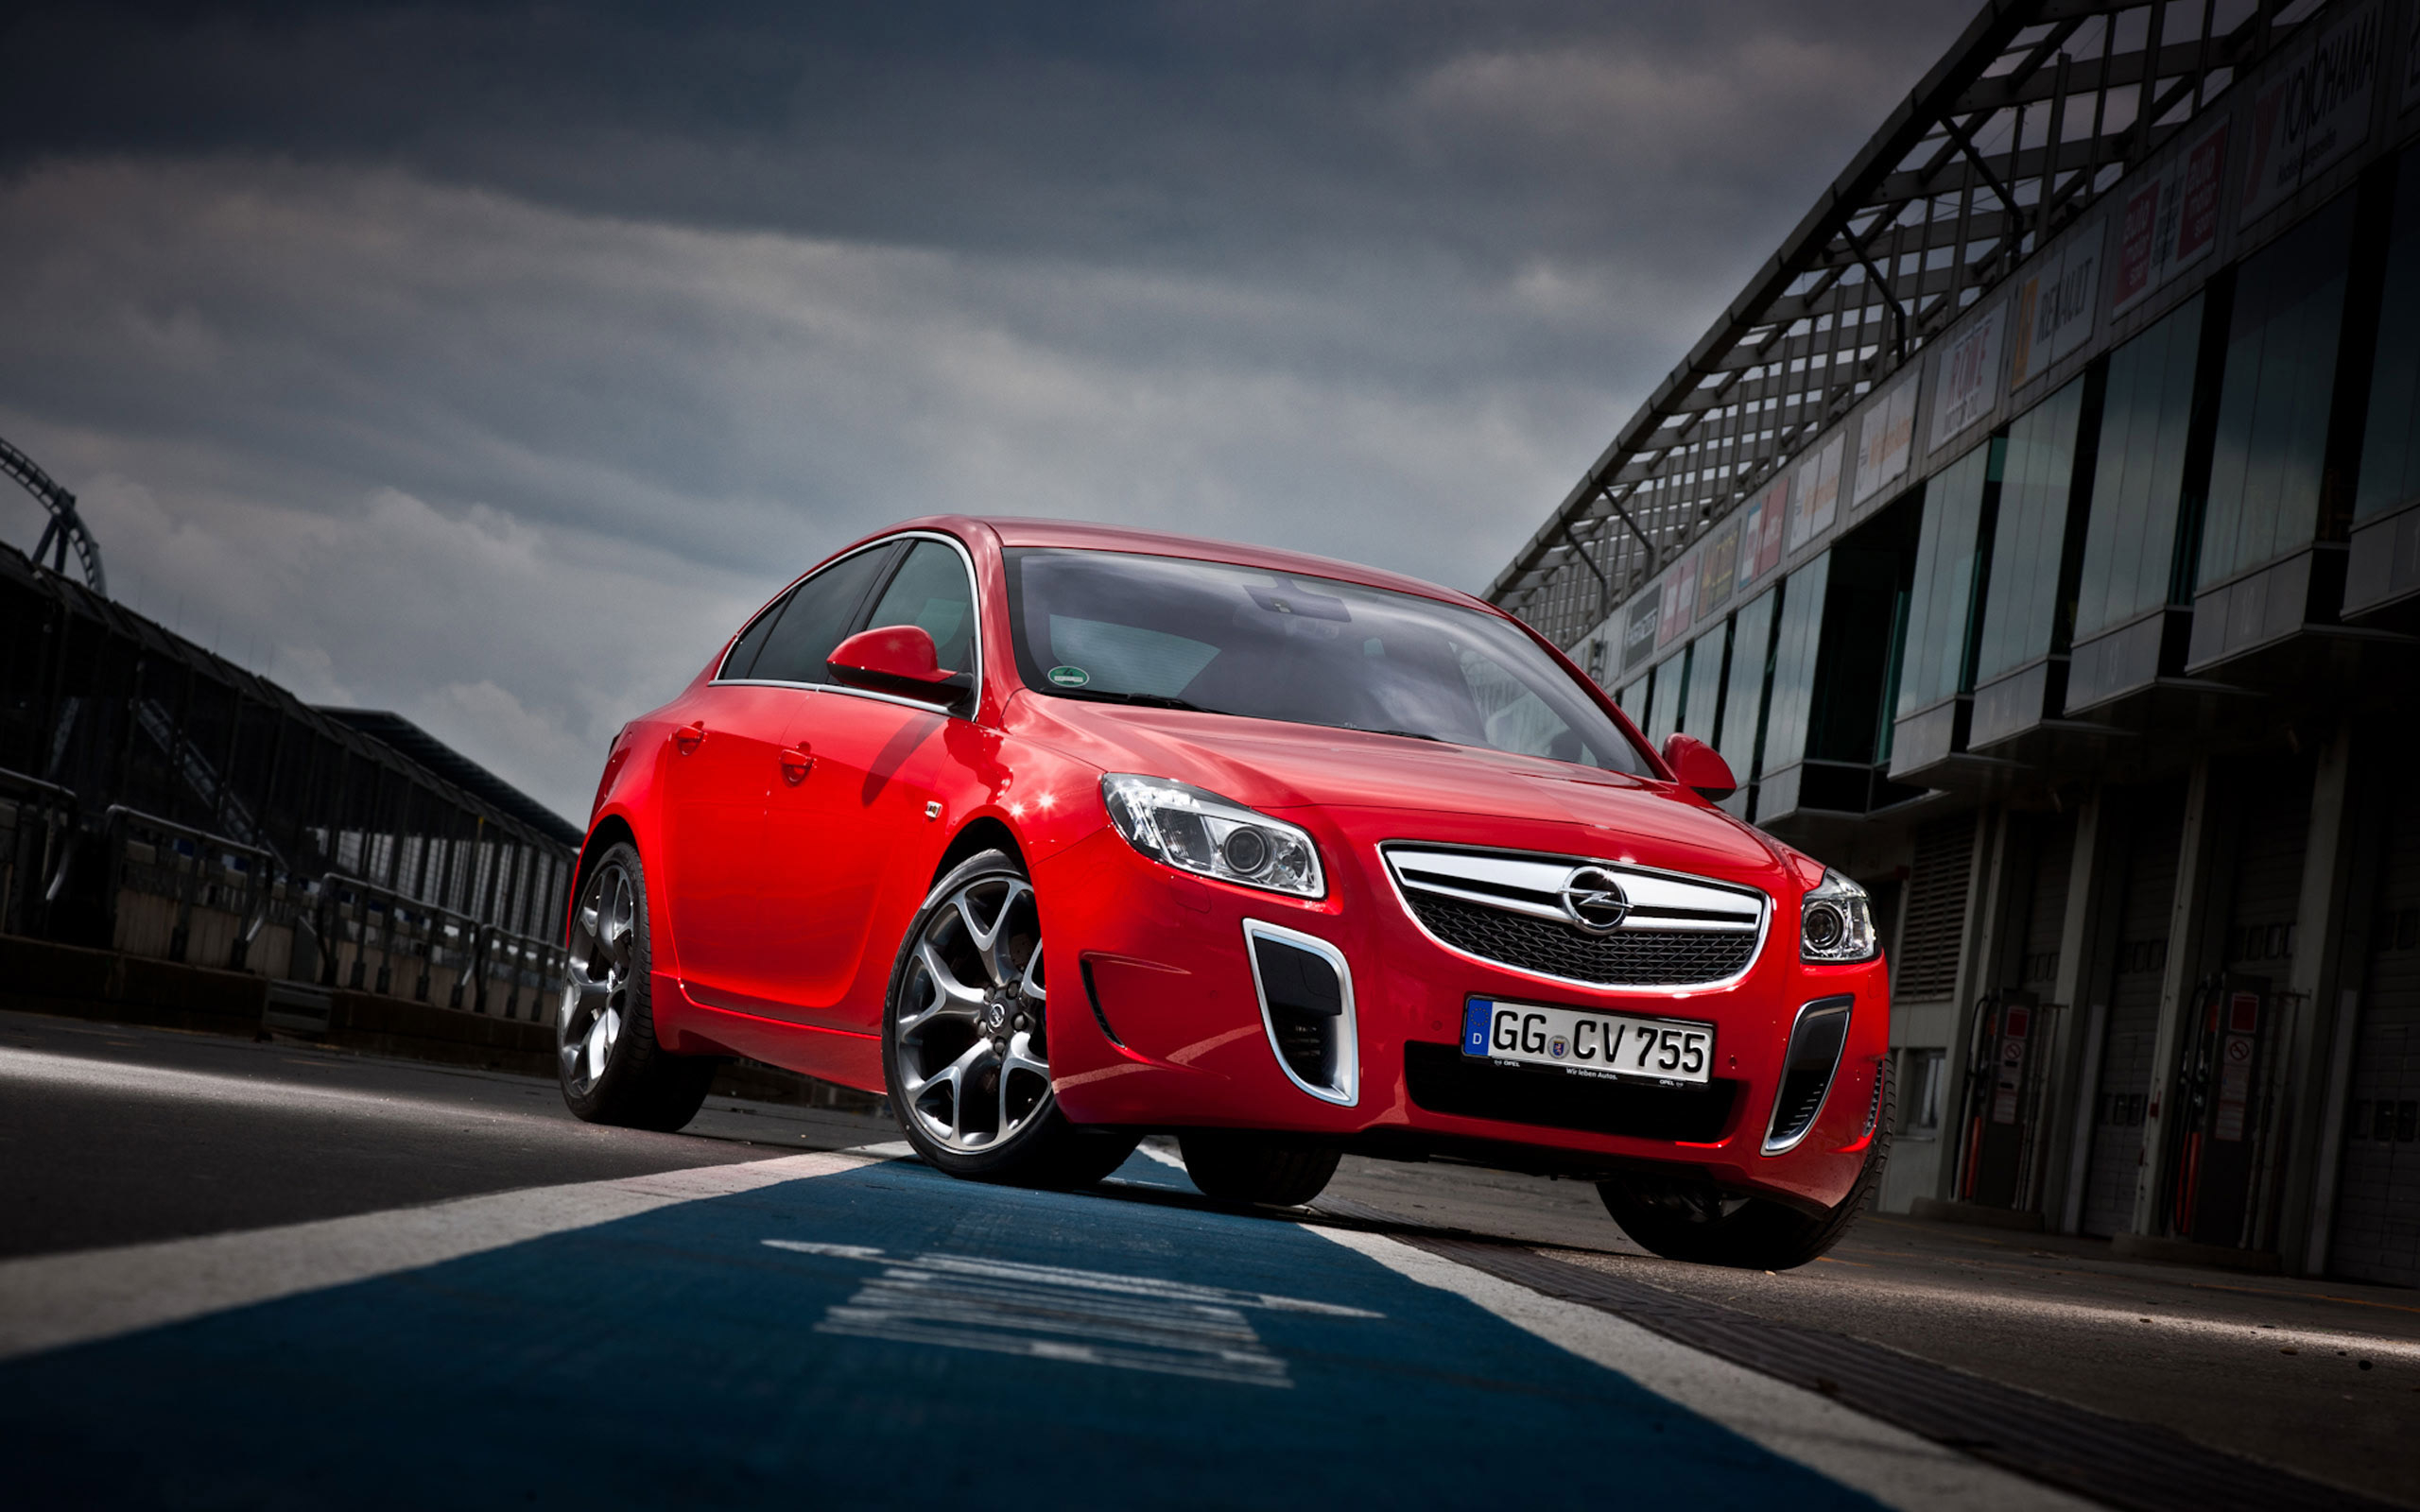 Opel Insignia Wallpapers Group with 51 items